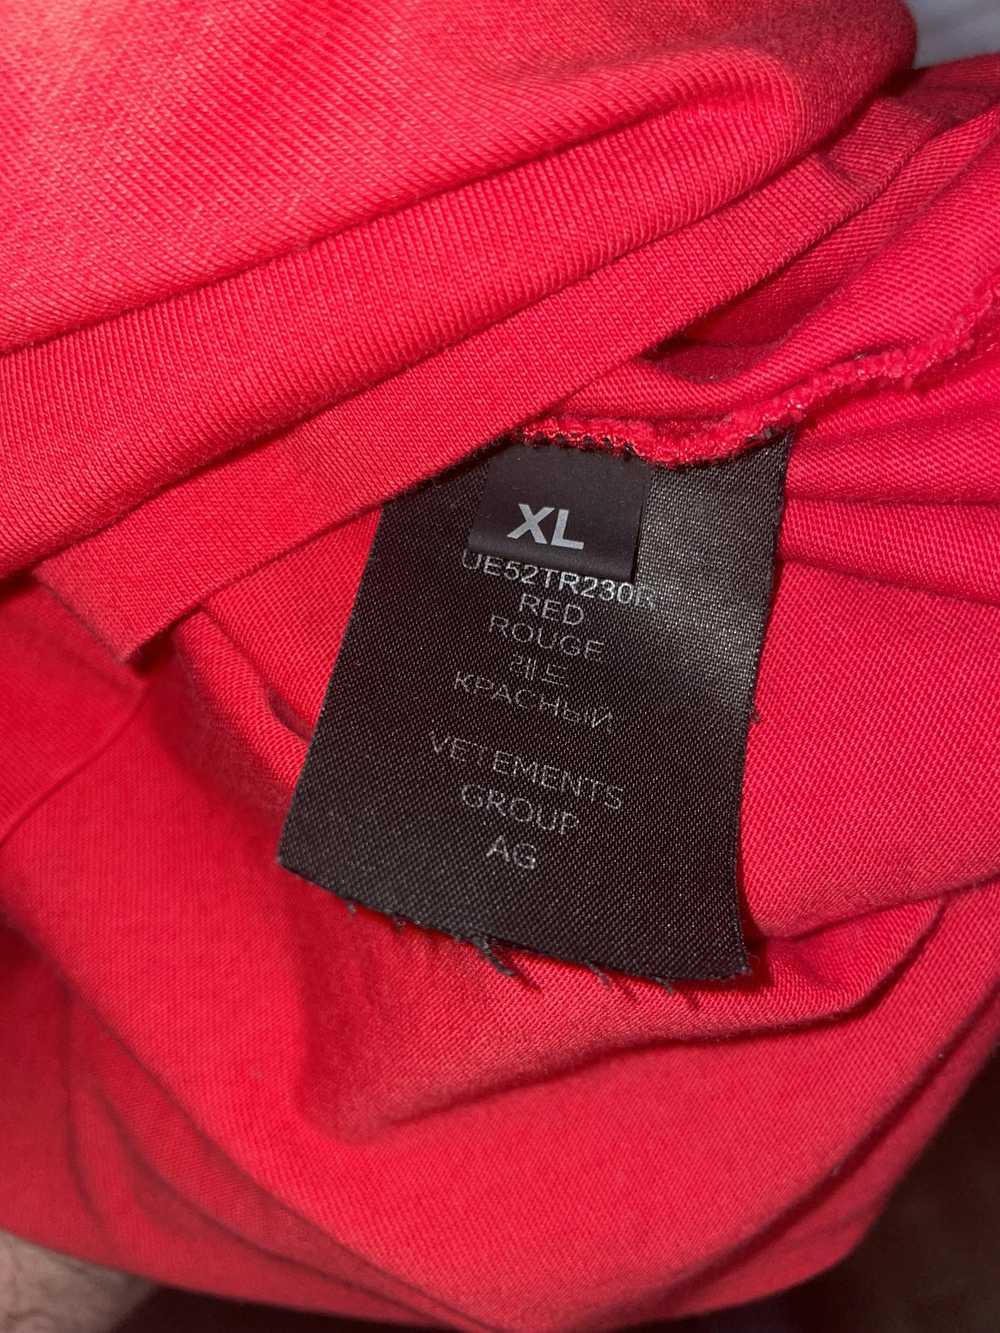 Vetements Red Crystal Logo T-shirt *SOLD* - image 5